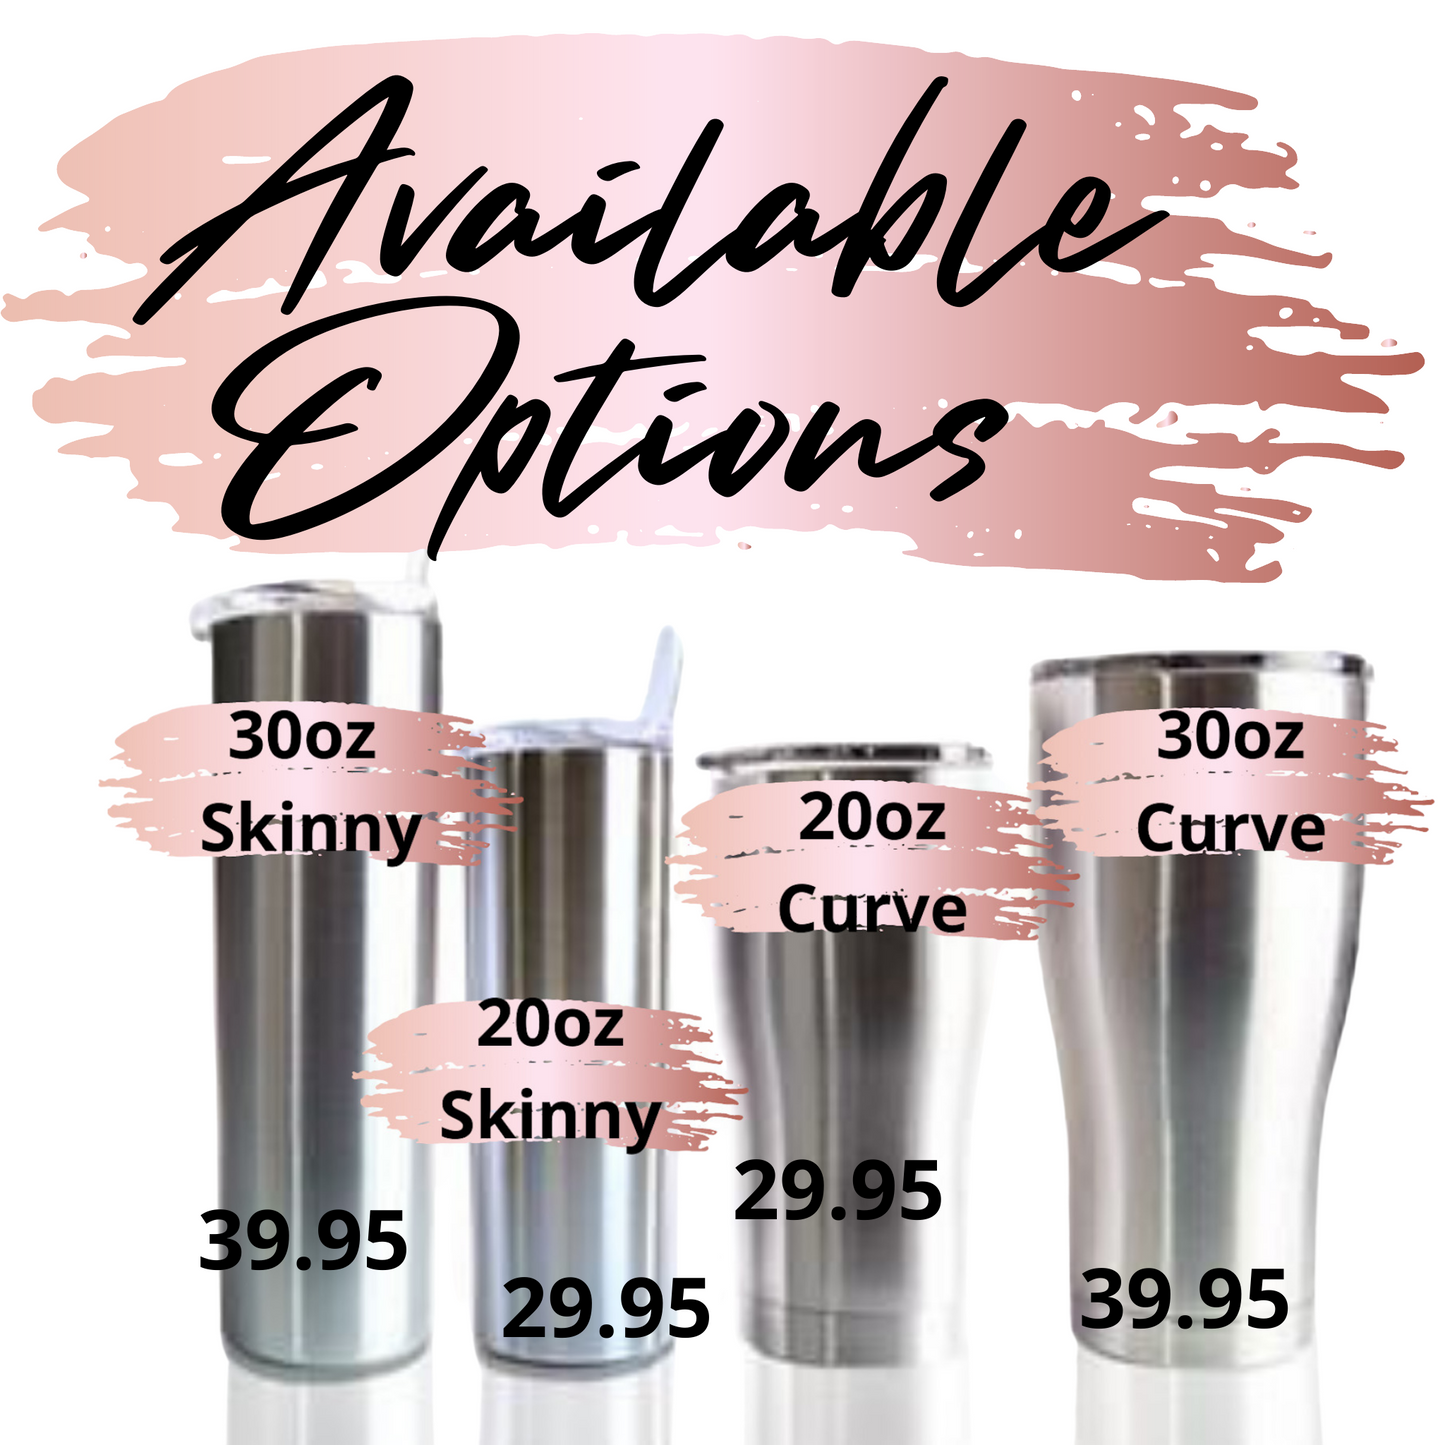 Custom Personalized Silver Grey White  Ombre Glitter Tumbler Cup With Lid